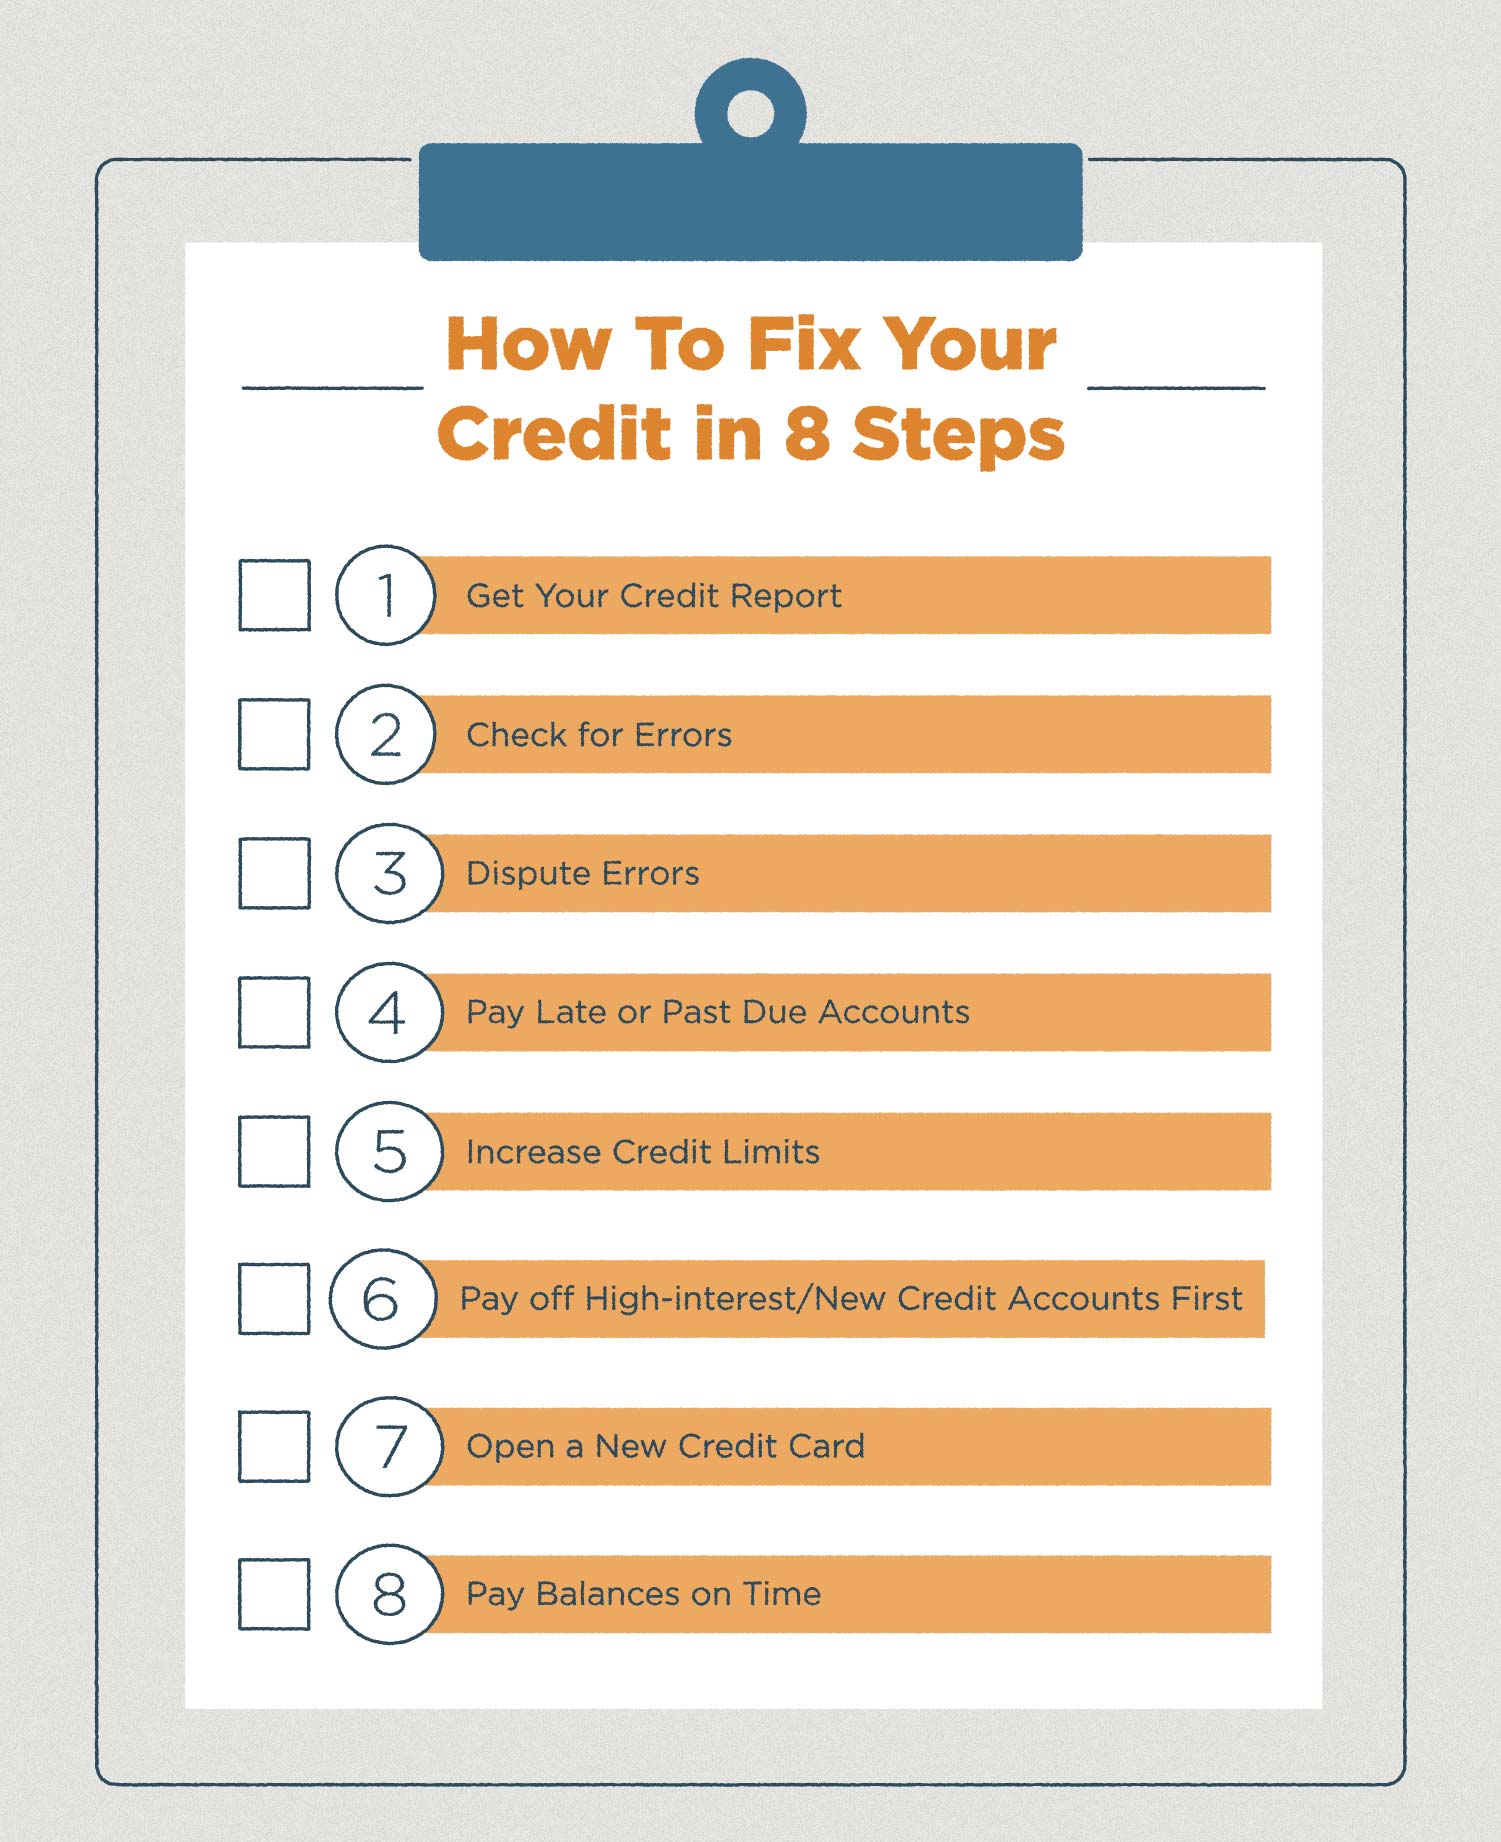 How To Fix Credit In 8 Easy Steps